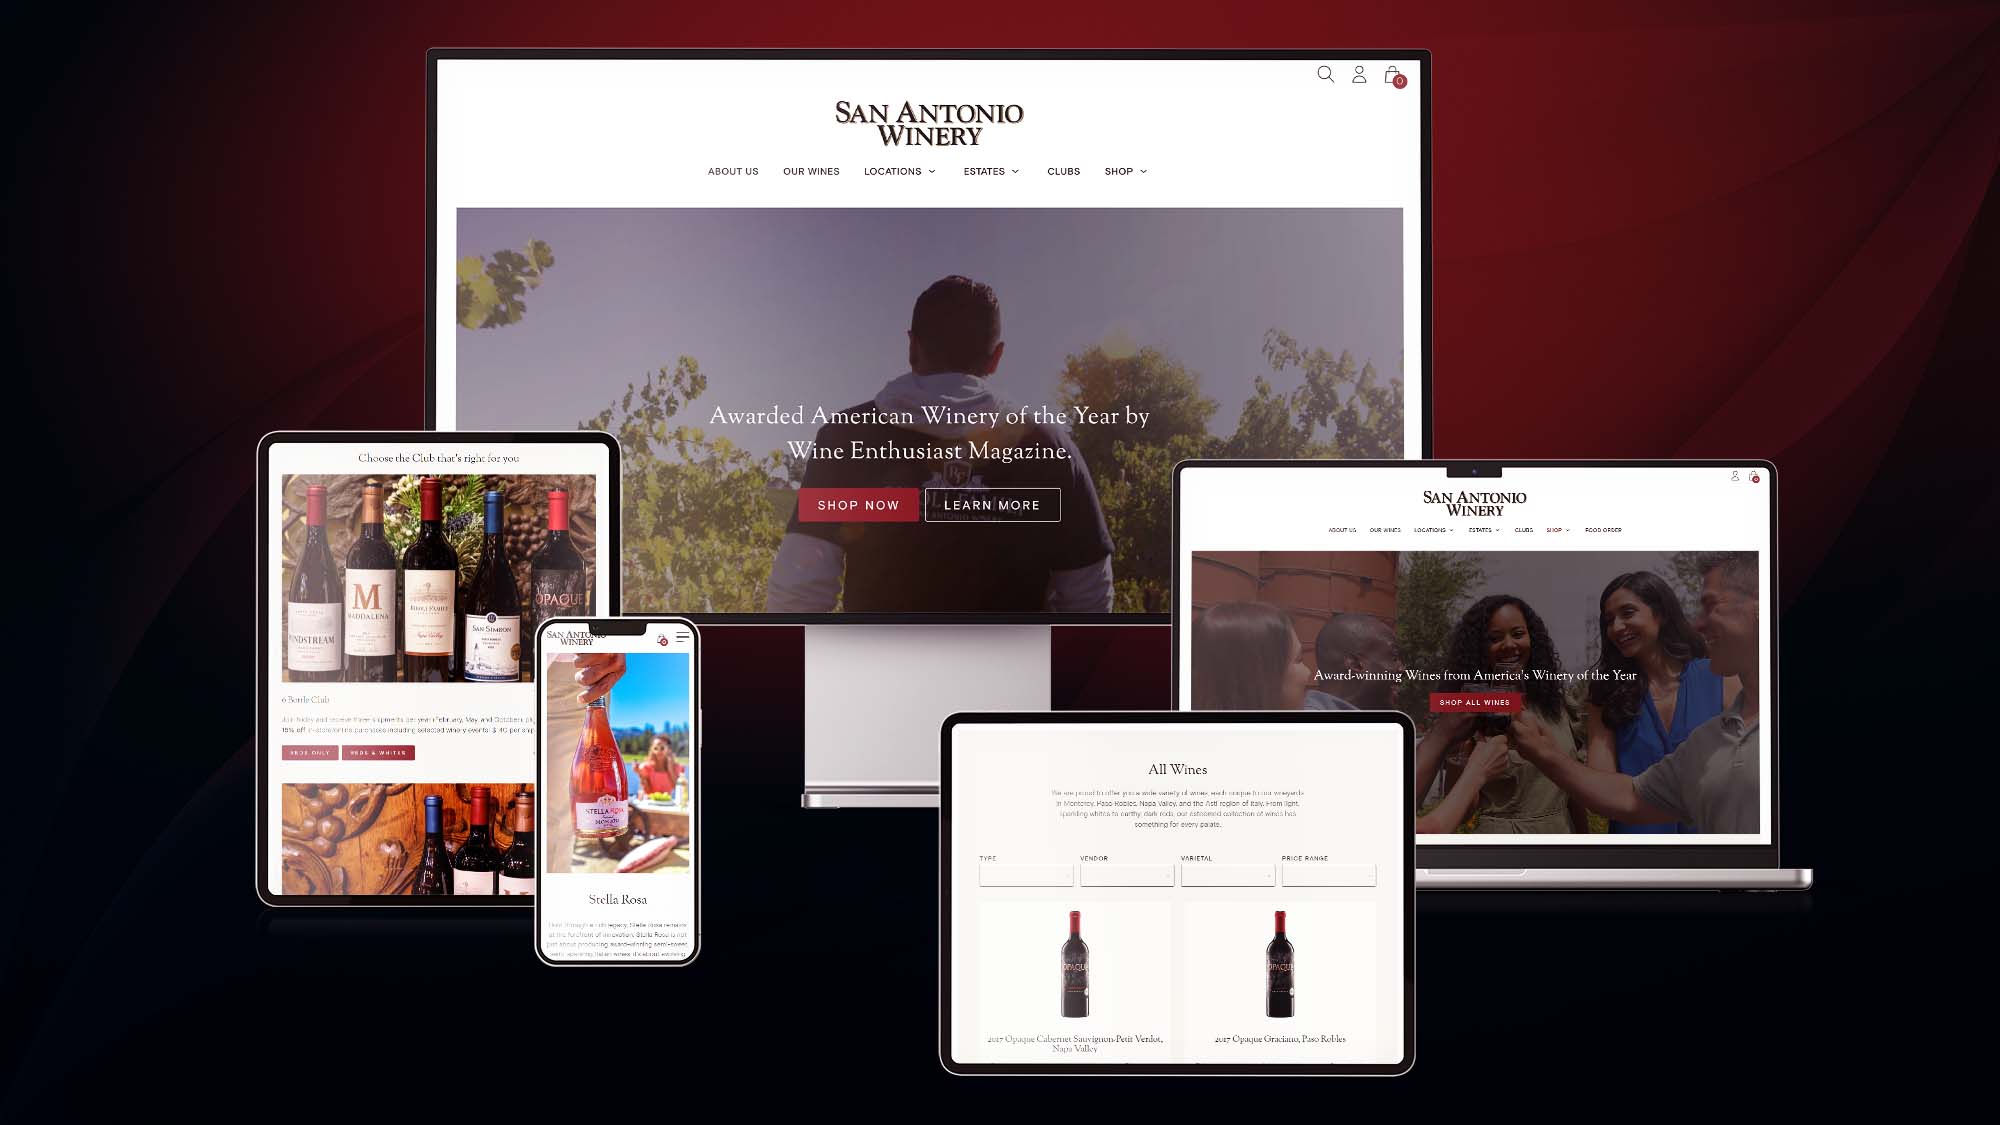 View our San Antonio Winery website project